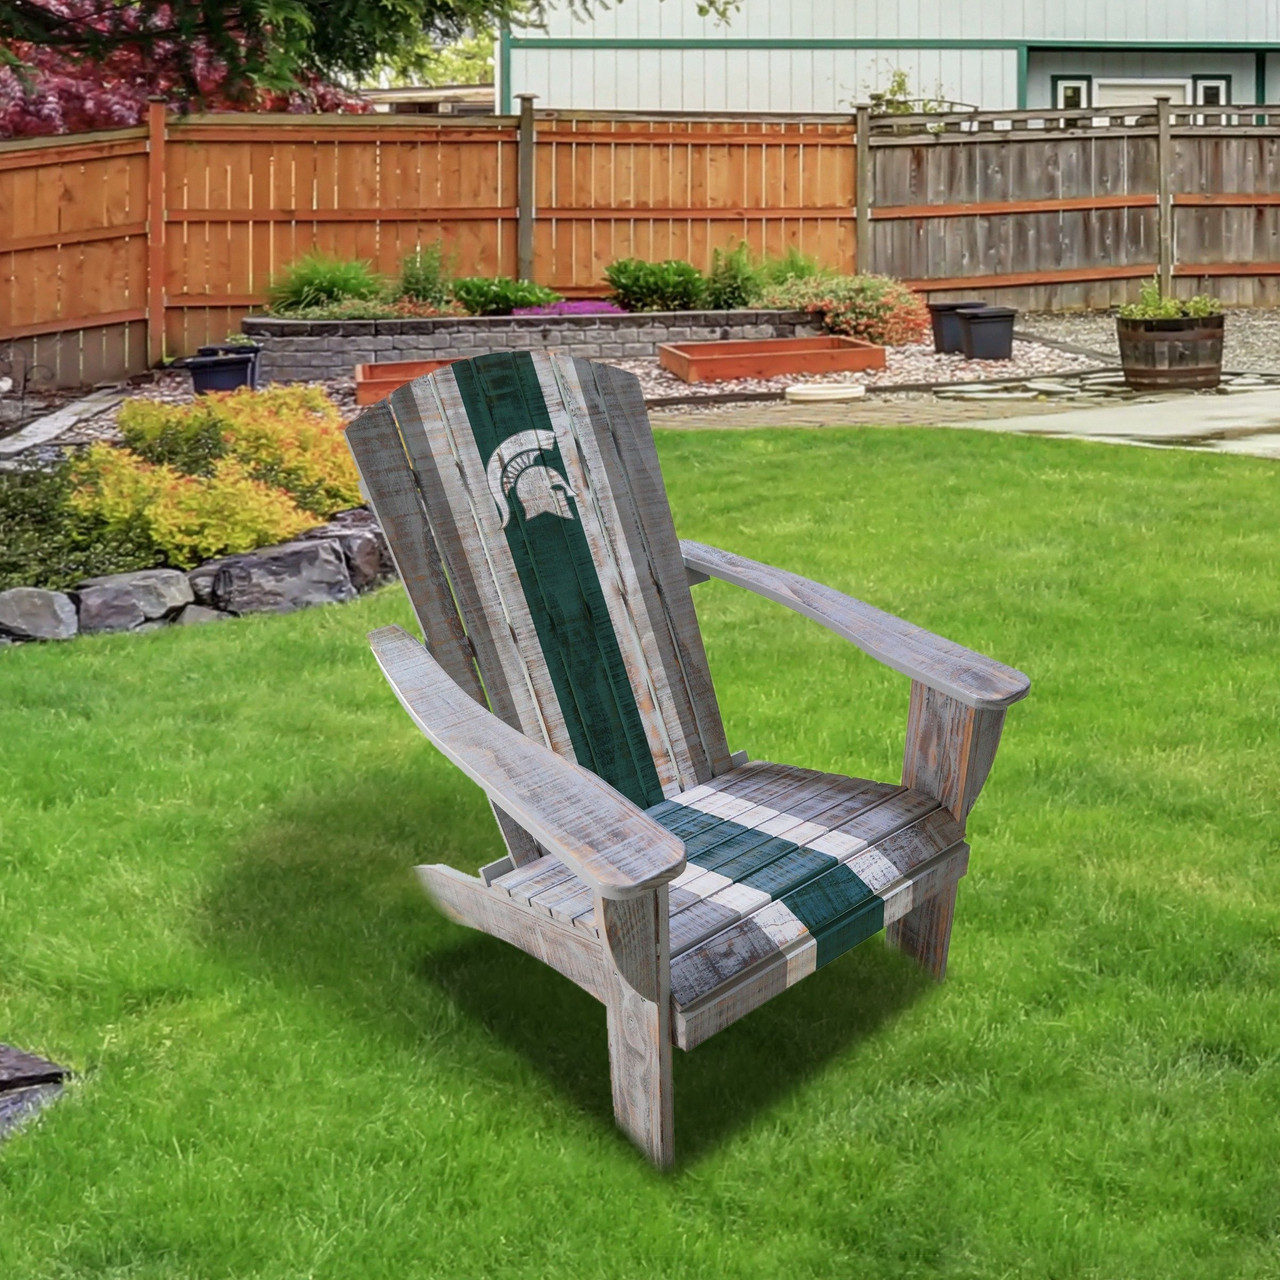 711-7016, Michigan State University, Spartans, Wood, Adirondack, Chair, NCAA, Imperial, FREE SHIPPING, 720801117164